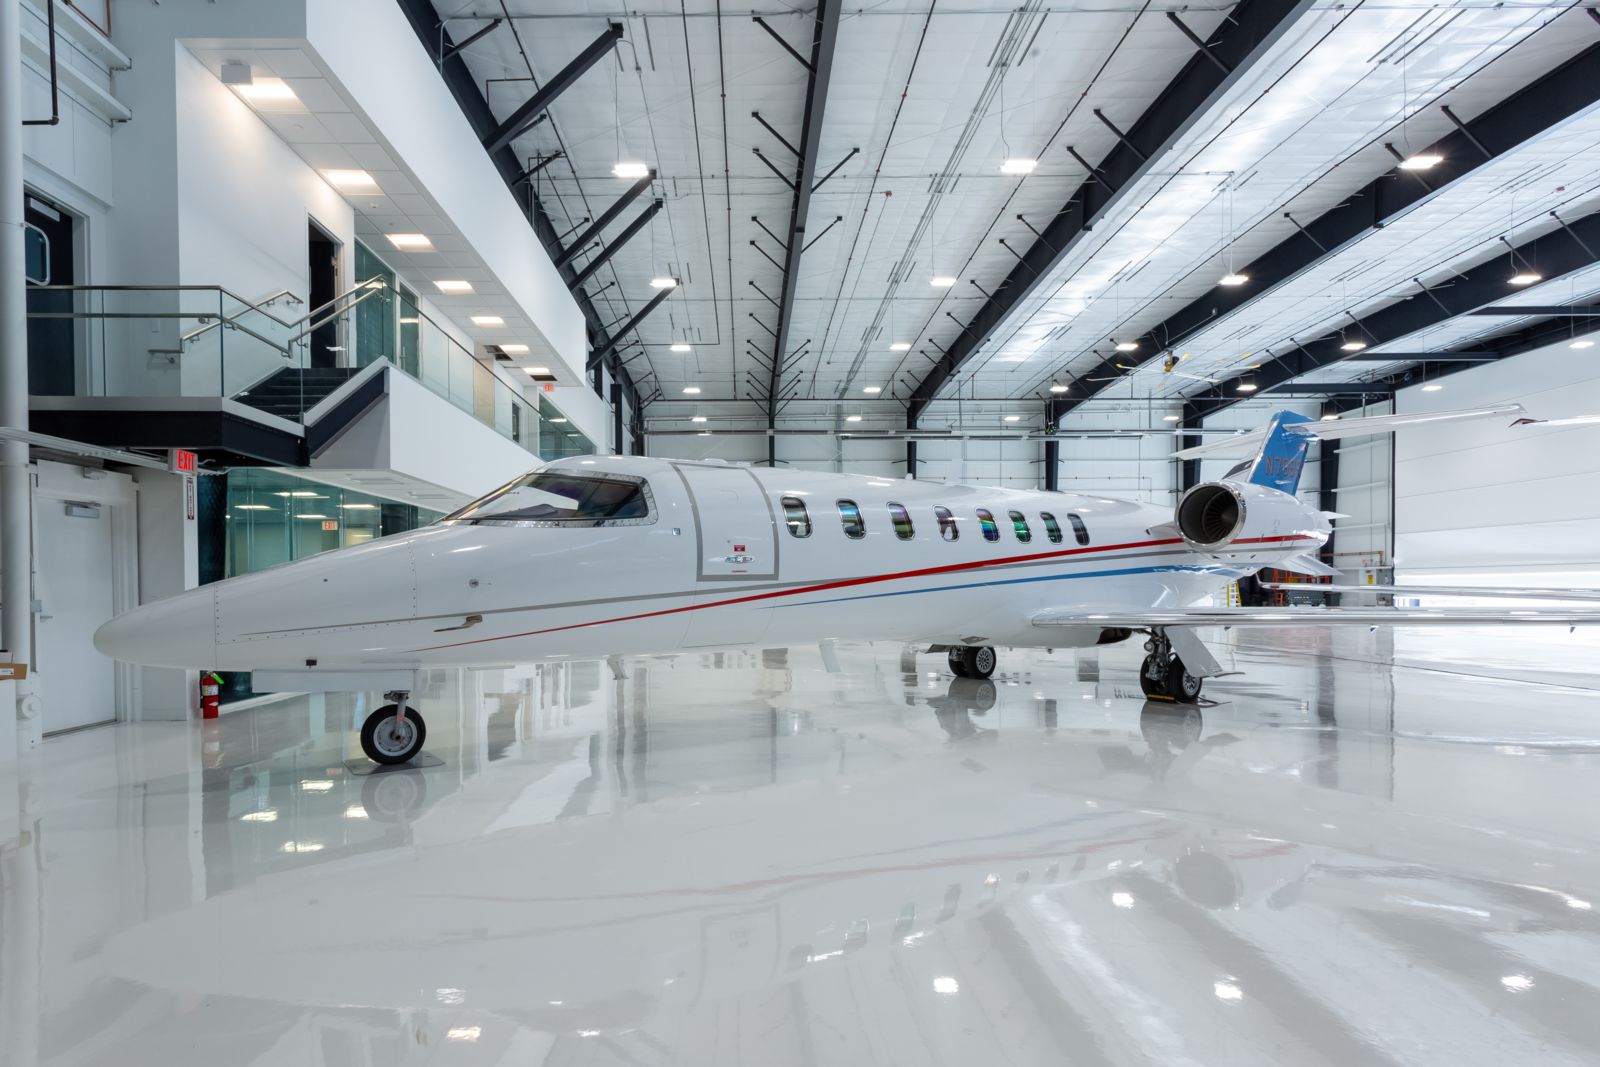 Bombardier Learjet 75 S/N 45-531 for sale | feature image